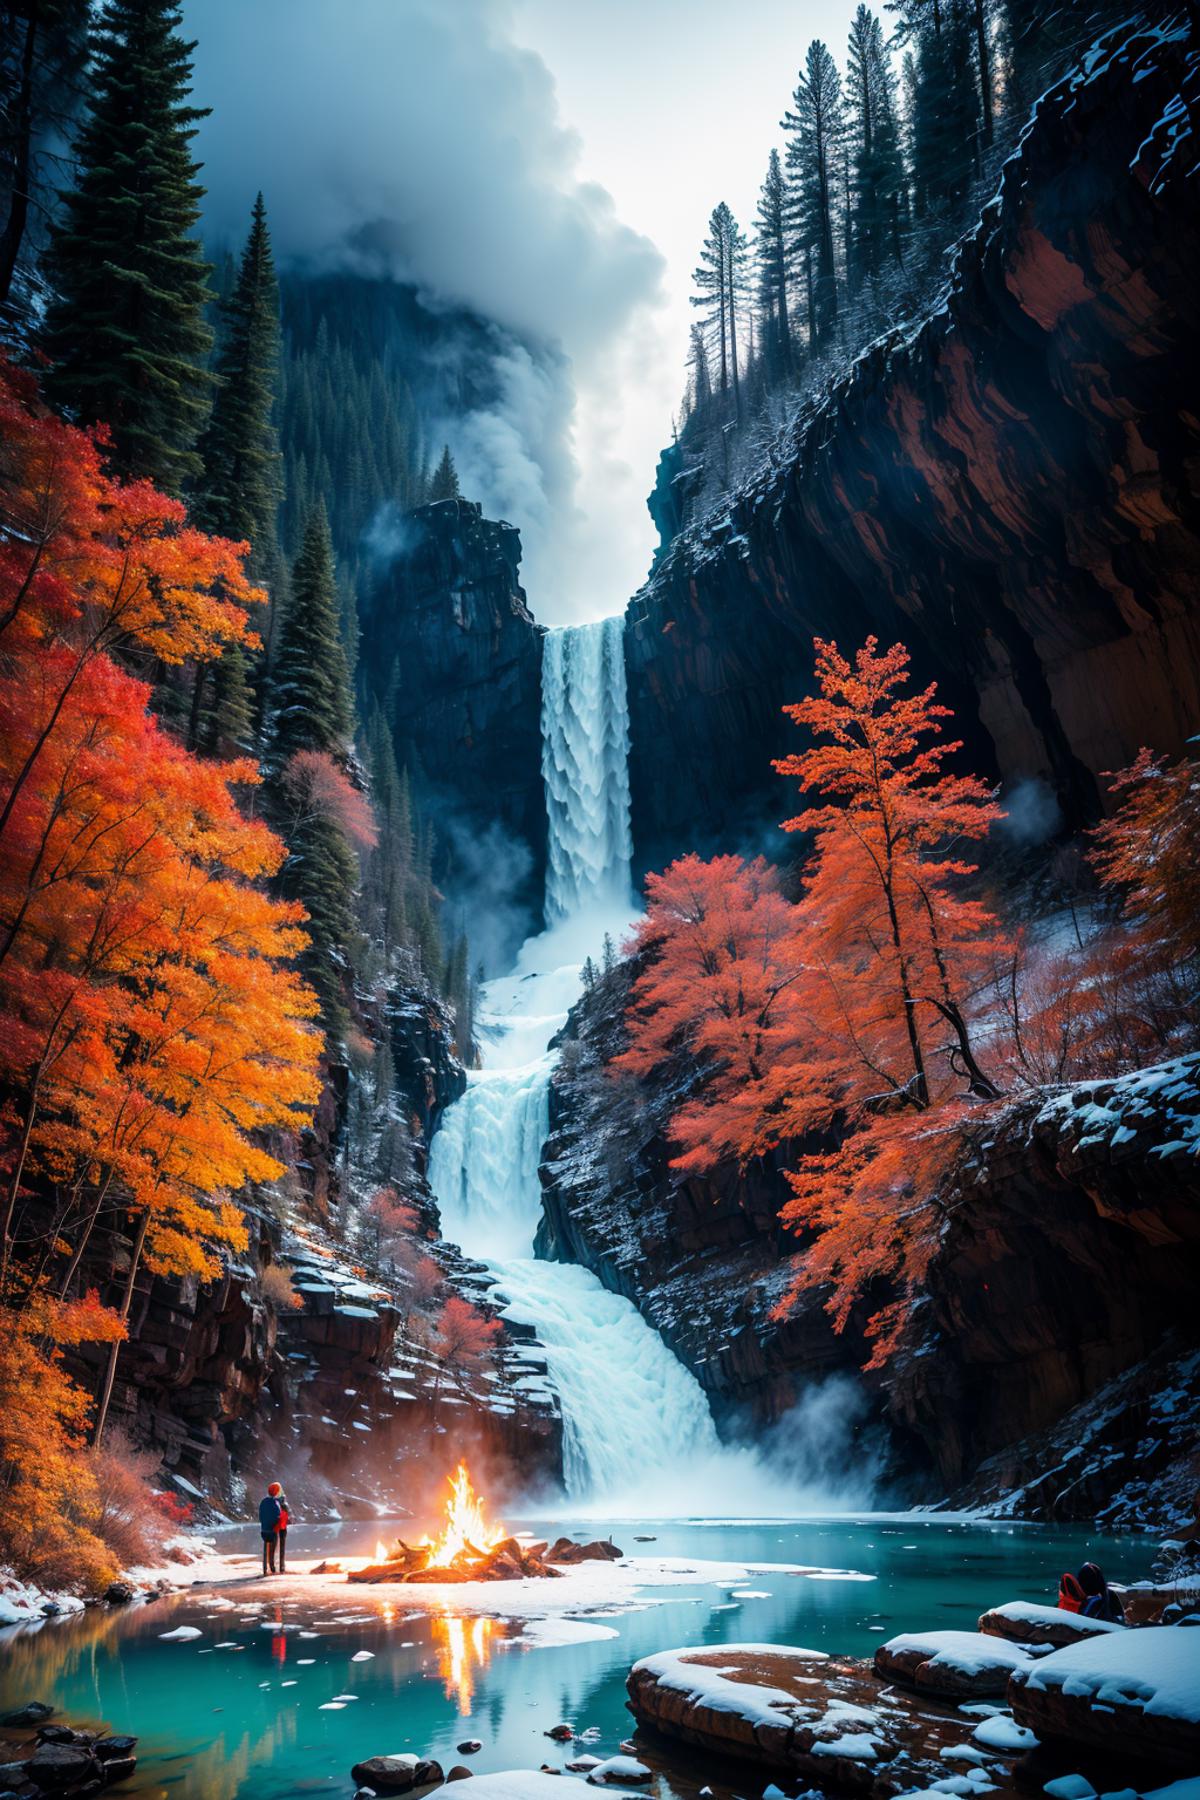 A Majestic Waterfall in a Mountain Canyon with Trees